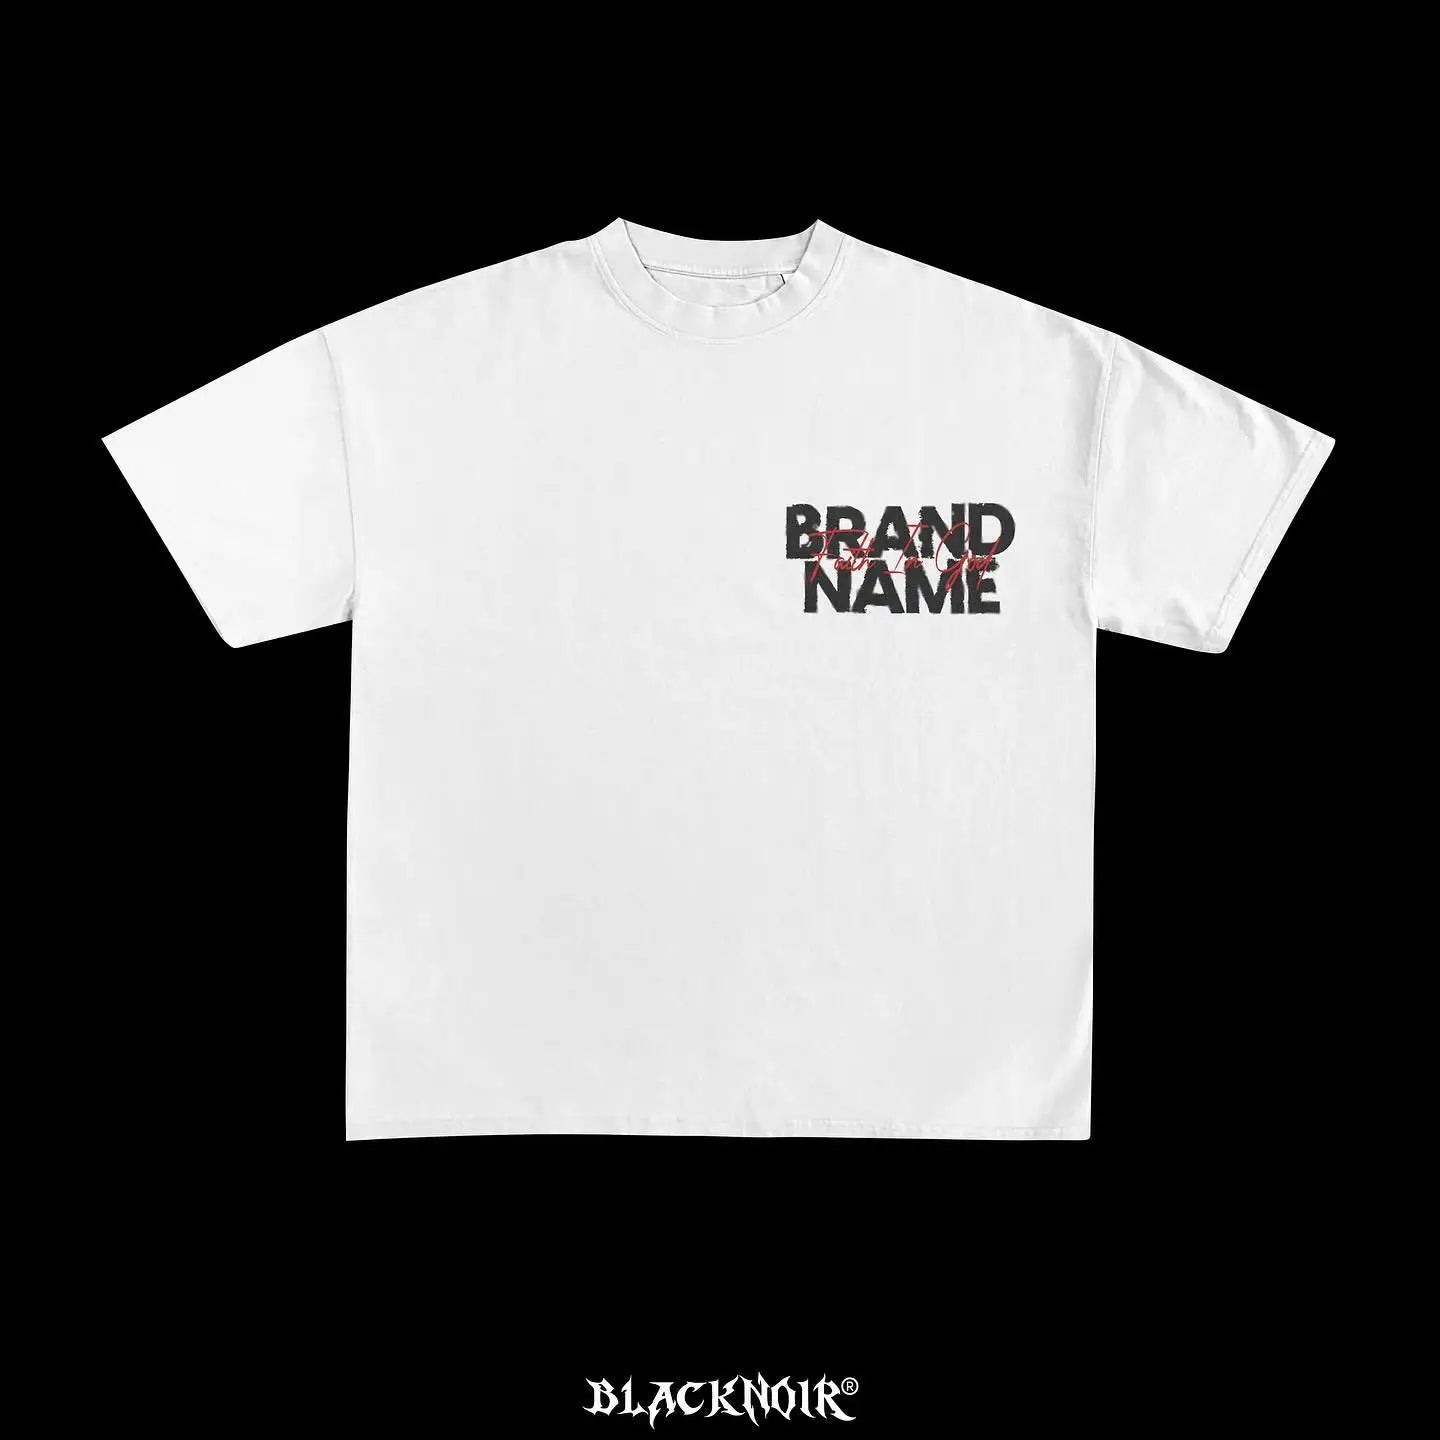 White, high-quality cotton T-shirt with the text "Maramalive™" in black and red letters on the left chest. The word "Mara" is slightly overlapped by "alive." This New street letter Print oversized t shirt men clothing graphic 2023 cotton American gothic high quality goth y2k tops also features the text "BLACKNOIR" at the bottom.